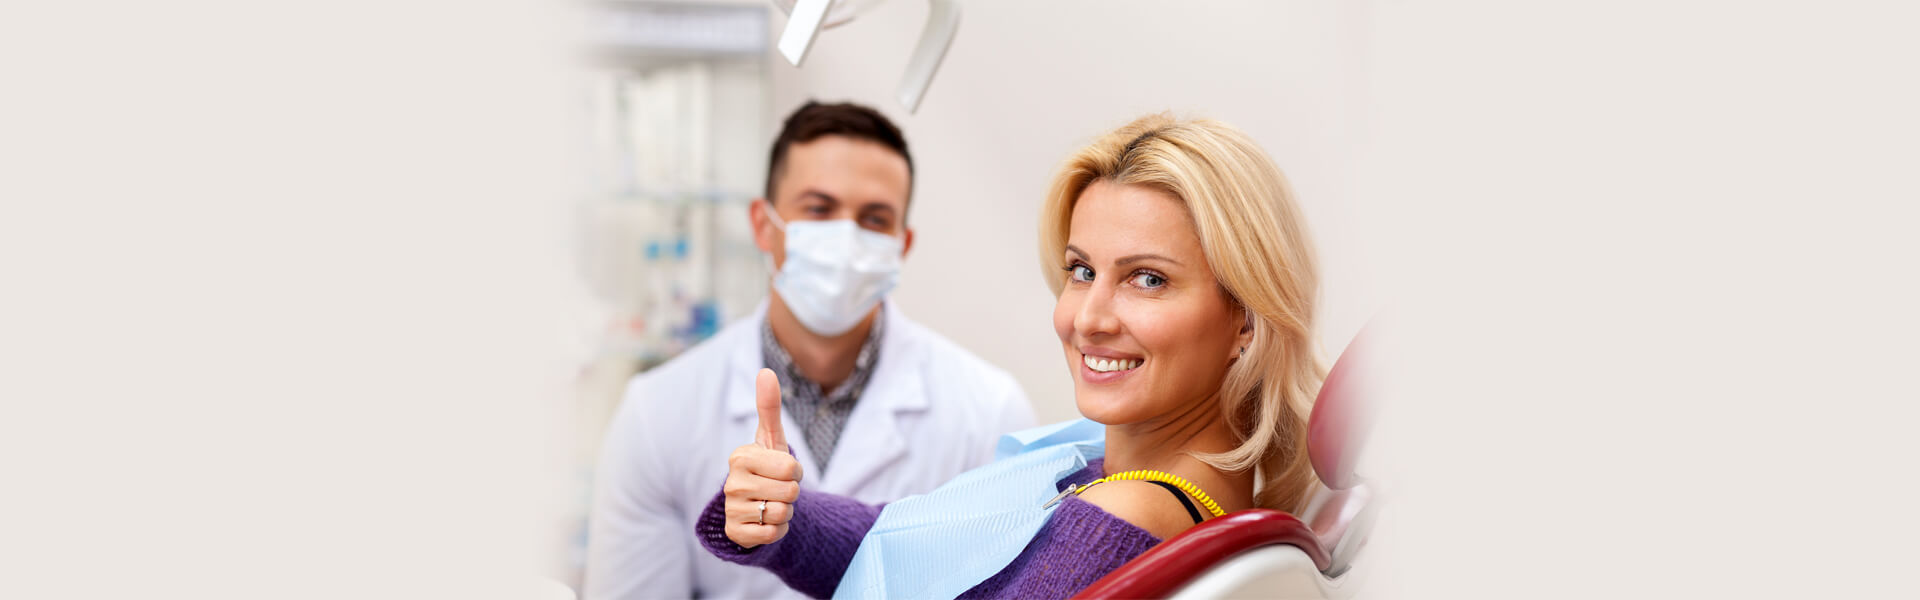 Root Canal Treatments: Do They Cause Any Health Problems?